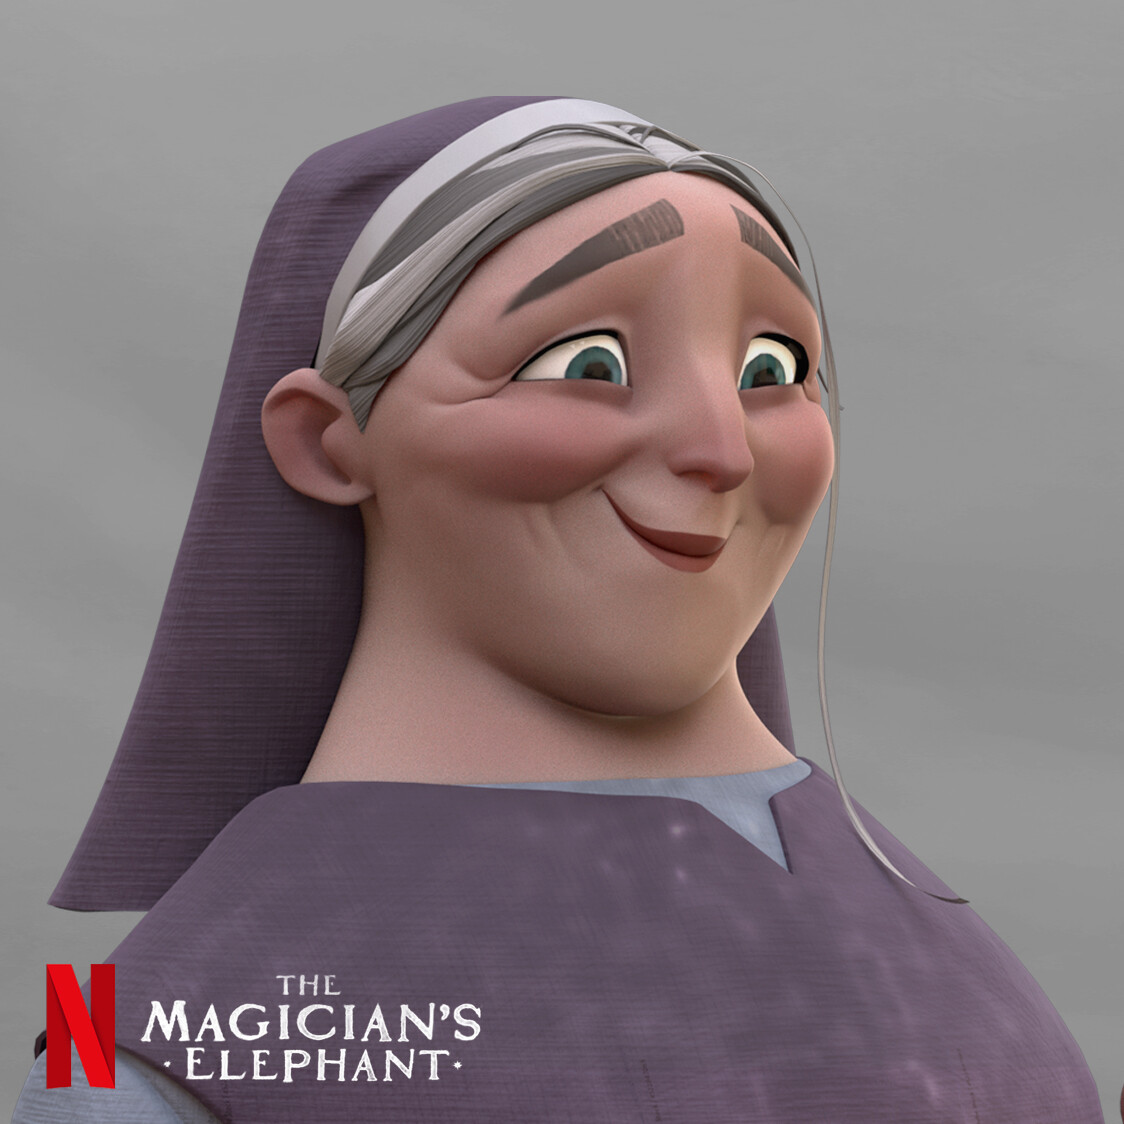 Sister Marie "The Magician's Elephant"